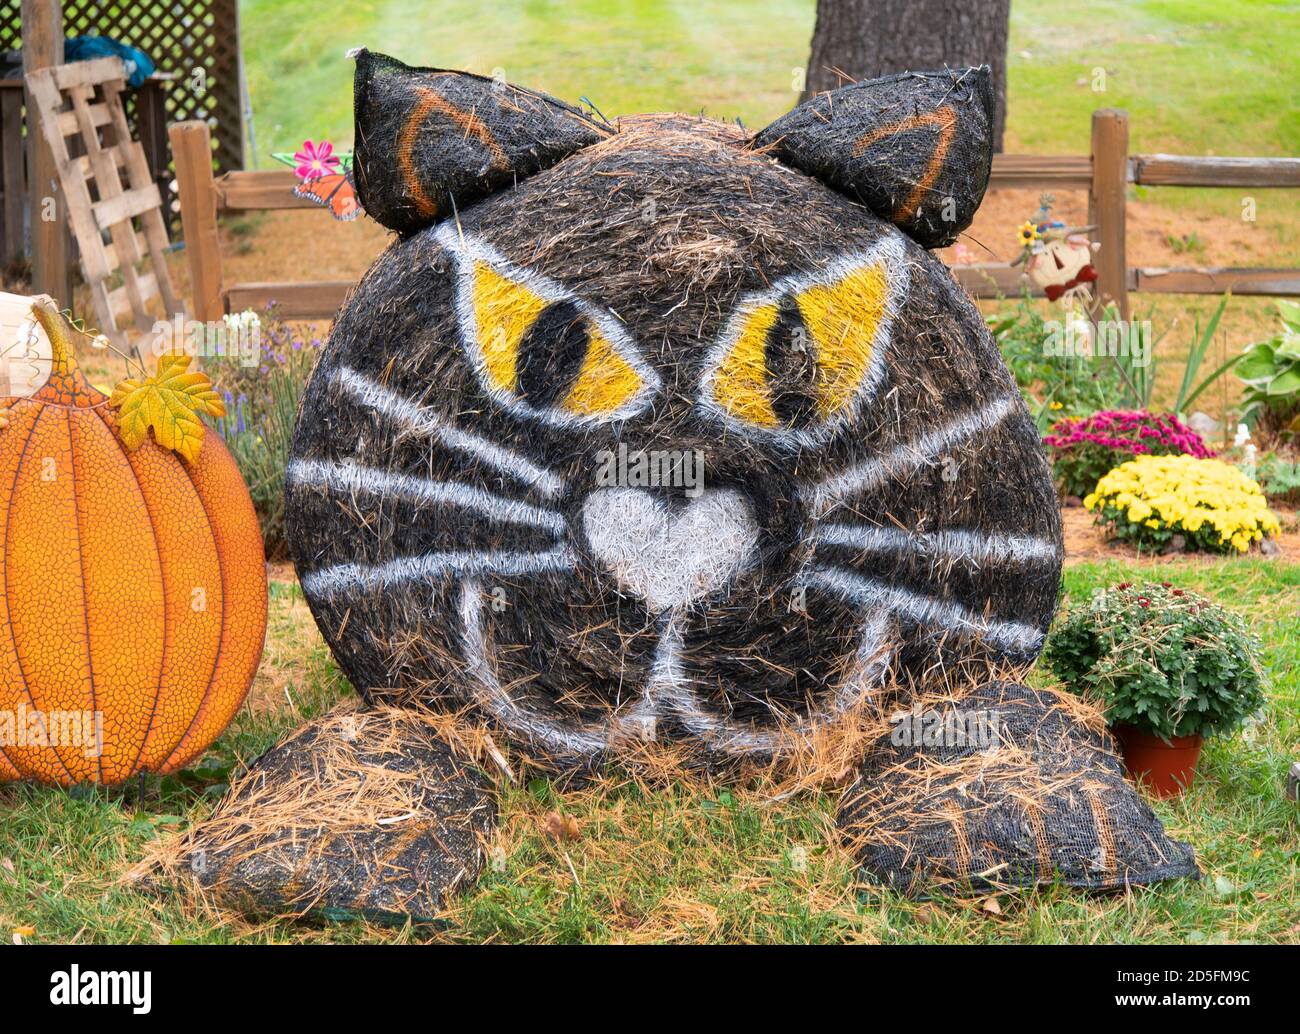 A cat made out of a bale of hay on display at a roadside farmstand in  Deerfield, Massachusetts, USA, Stock Photo